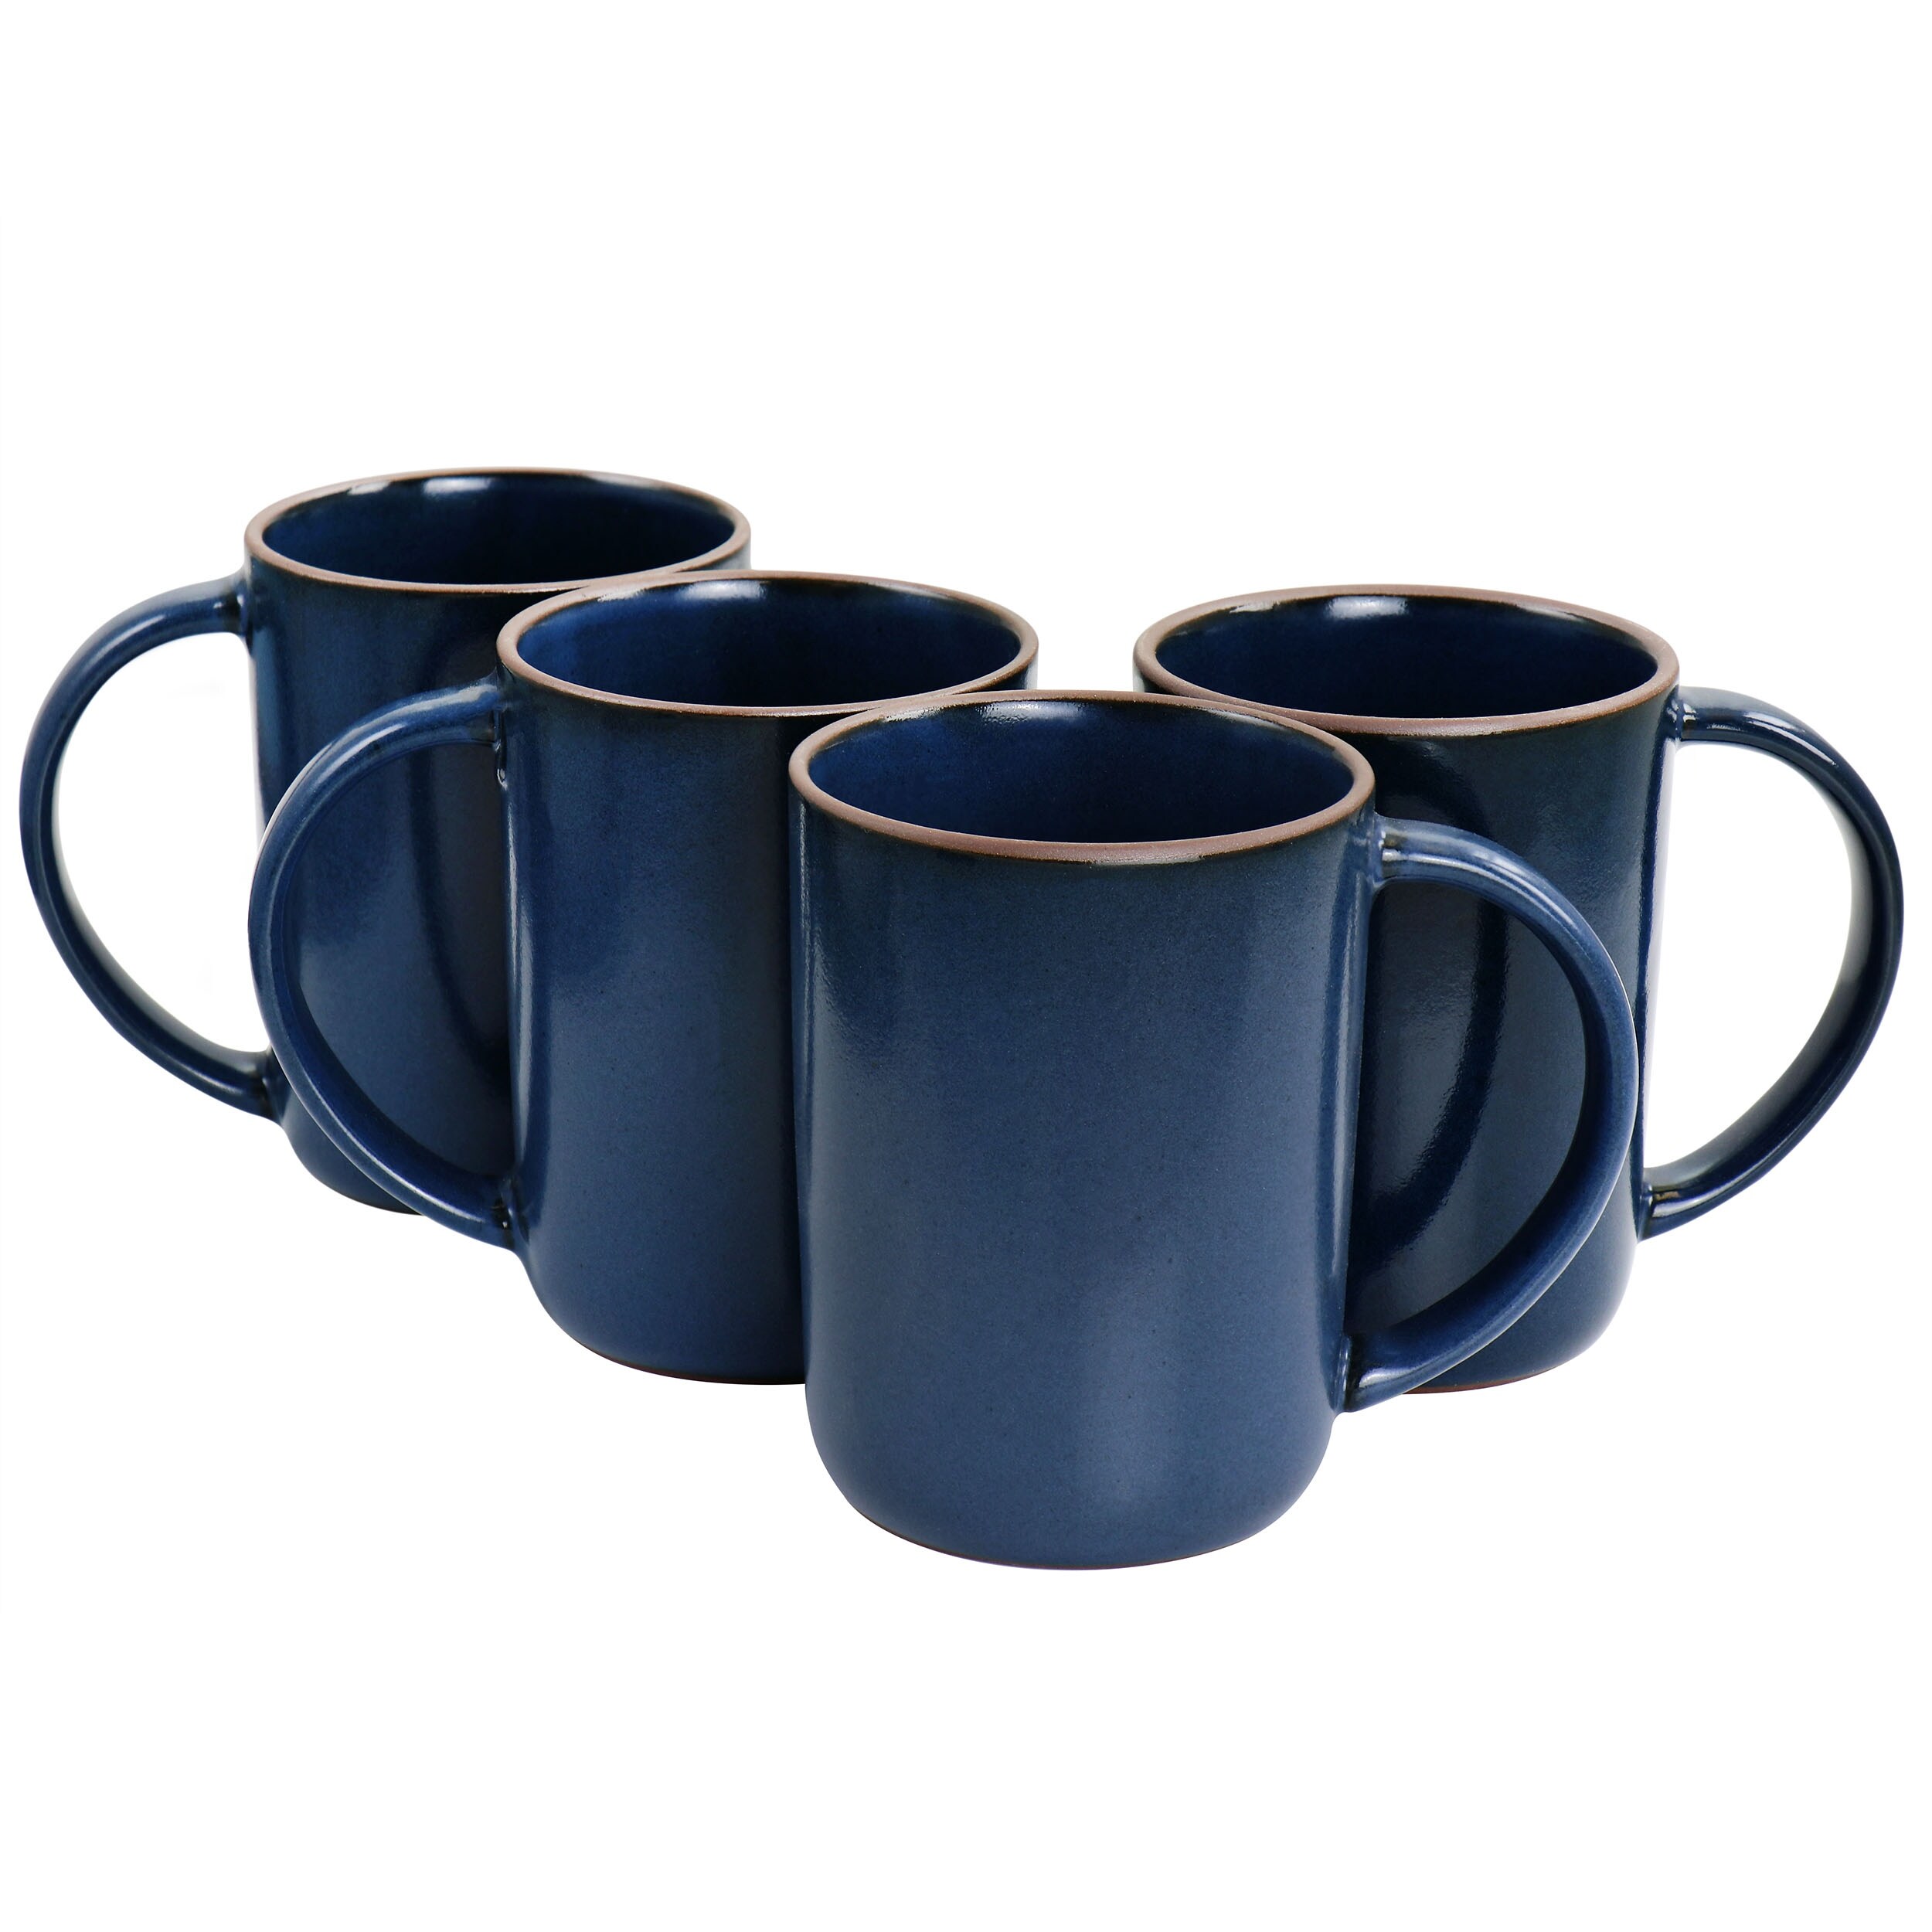 https://ak1.ostkcdn.com/images/products/is/images/direct/131c3ce7d3bdb1eac06e84be017ef5540ae37b60/Gibson-Elite-Dumont-4-Piece-17oz-Terracotta-Mug-Set-in-Navy-Blue.jpg